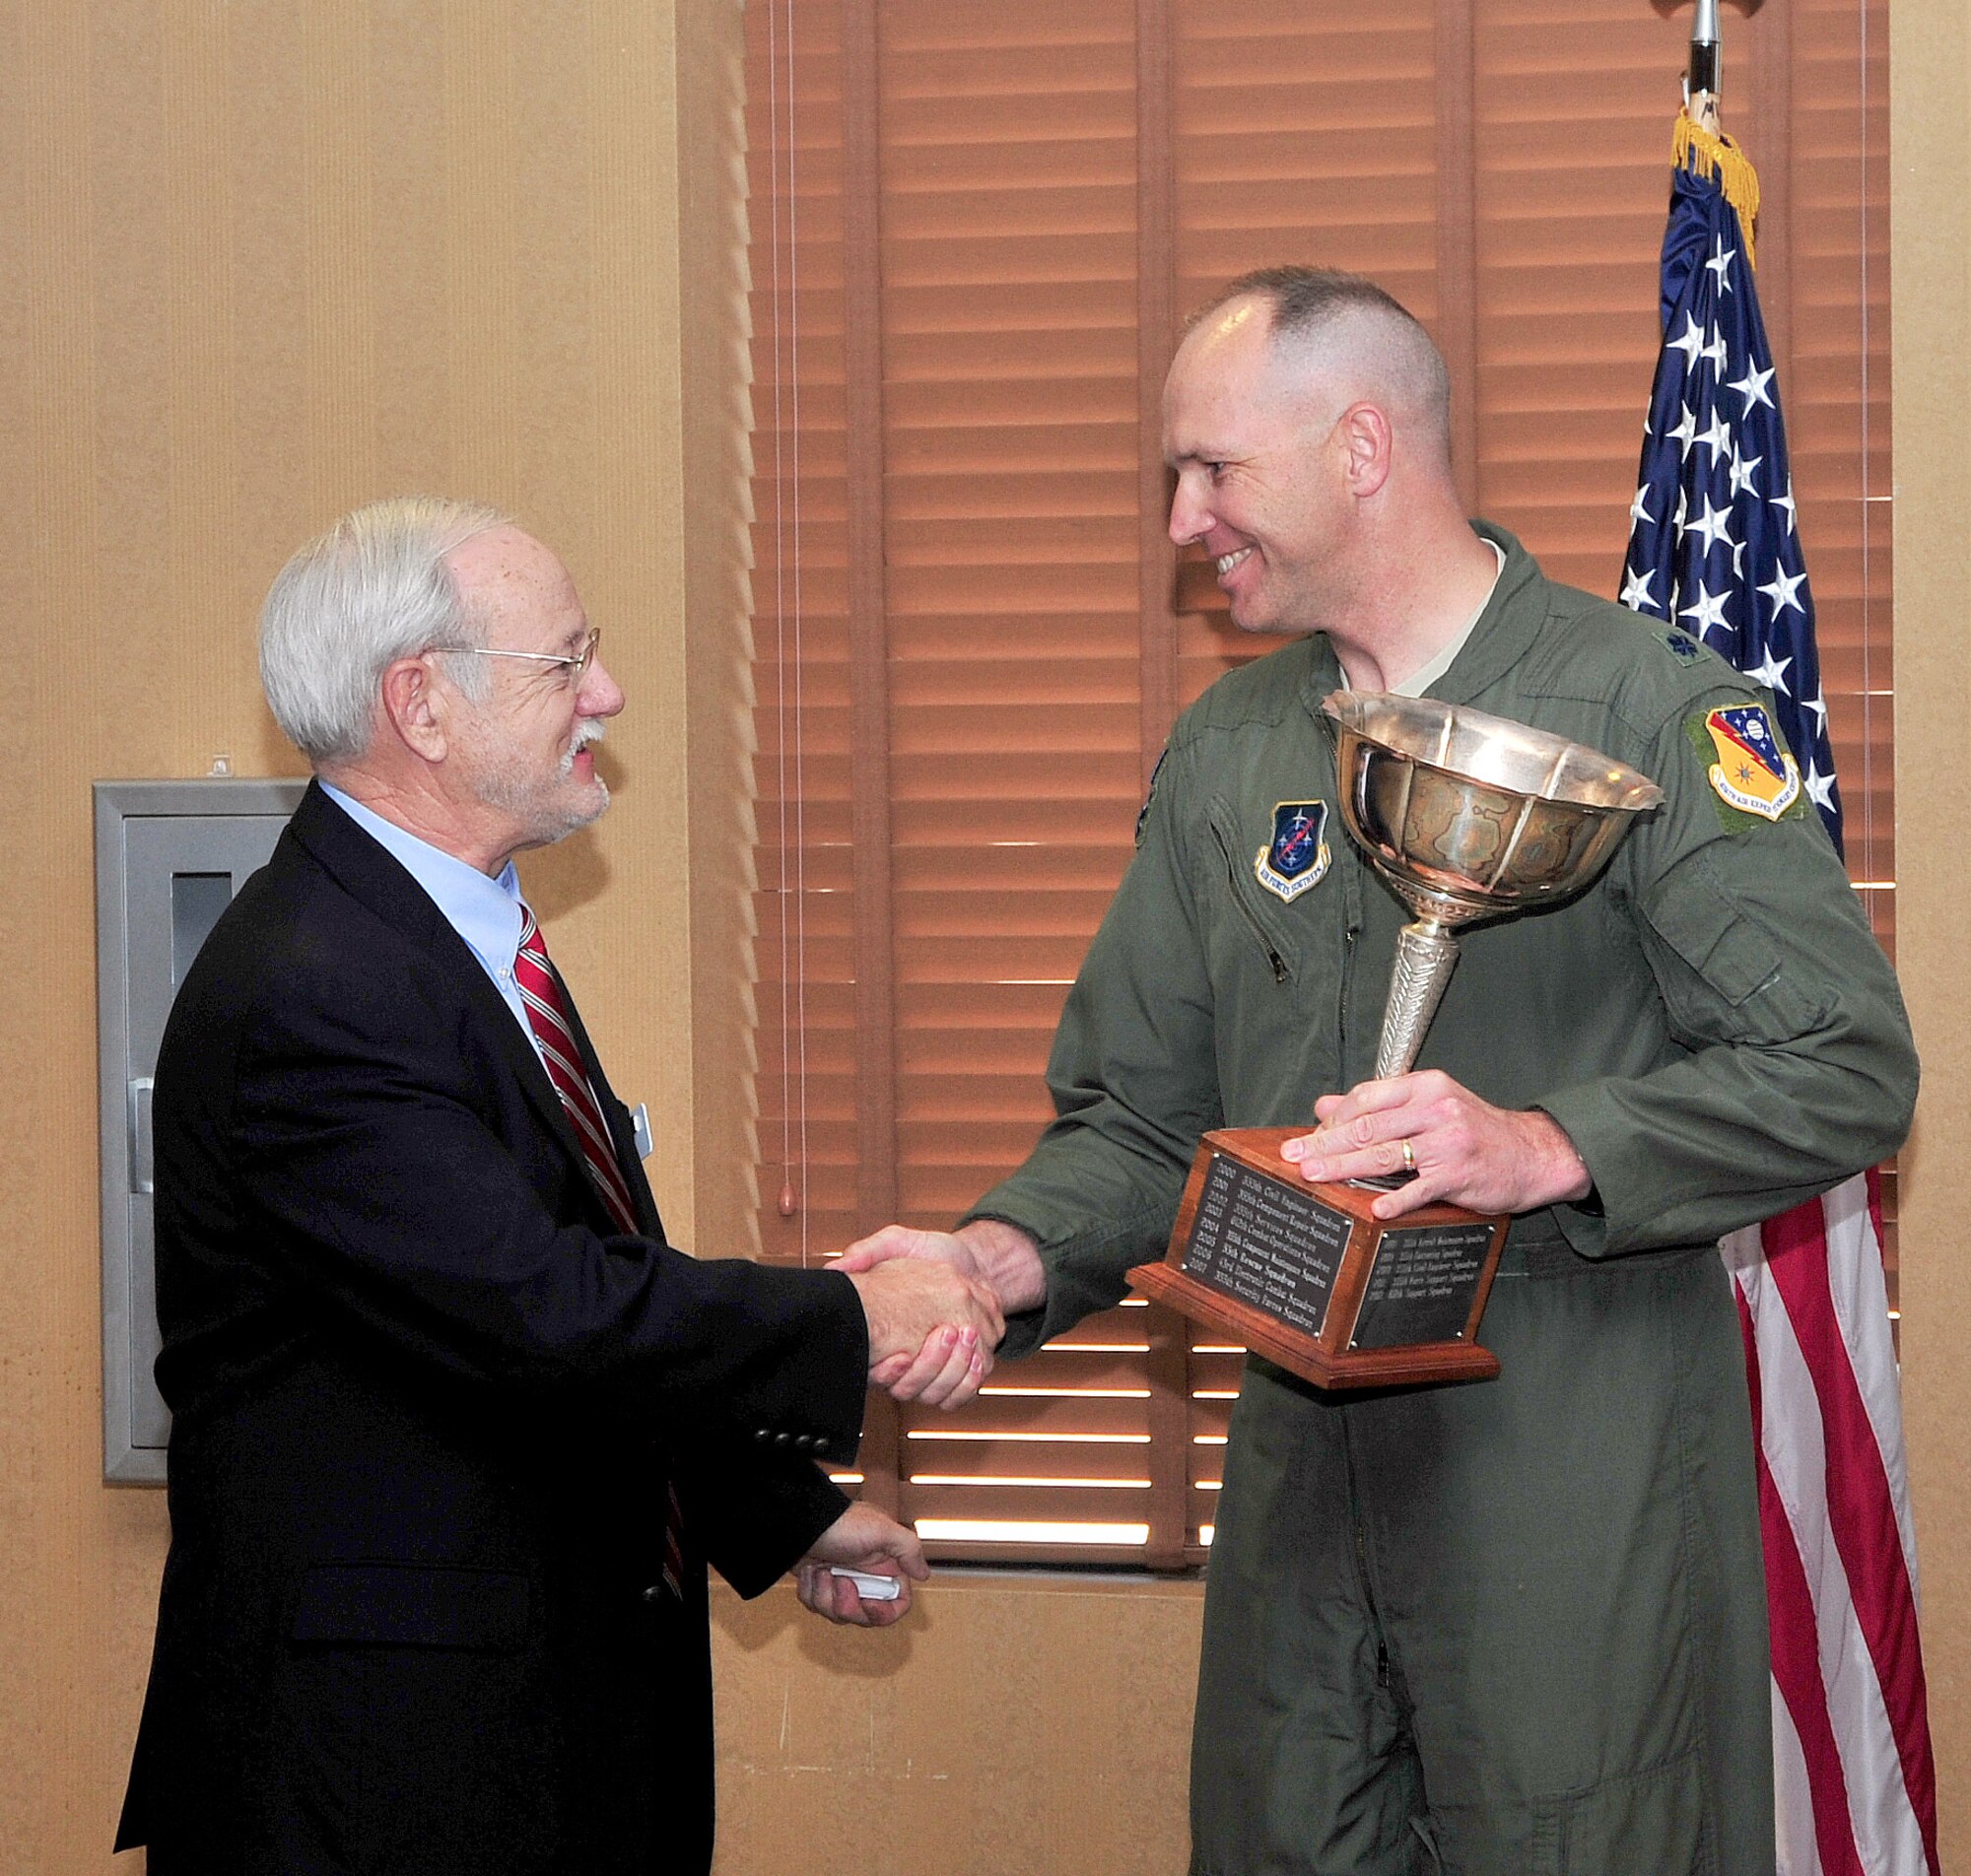 The 612th Support Squadron was awarded the 2012 E.D. Jewett Award by the Tucson Metropolitan Chamber of Commerce, March 7. The E.D. Jewett Award recognizes the squadron at Davis-Monthan AFB that best represents the finest tradition of military excellence and community involvement in the previous year.  (Courtesy photo). 